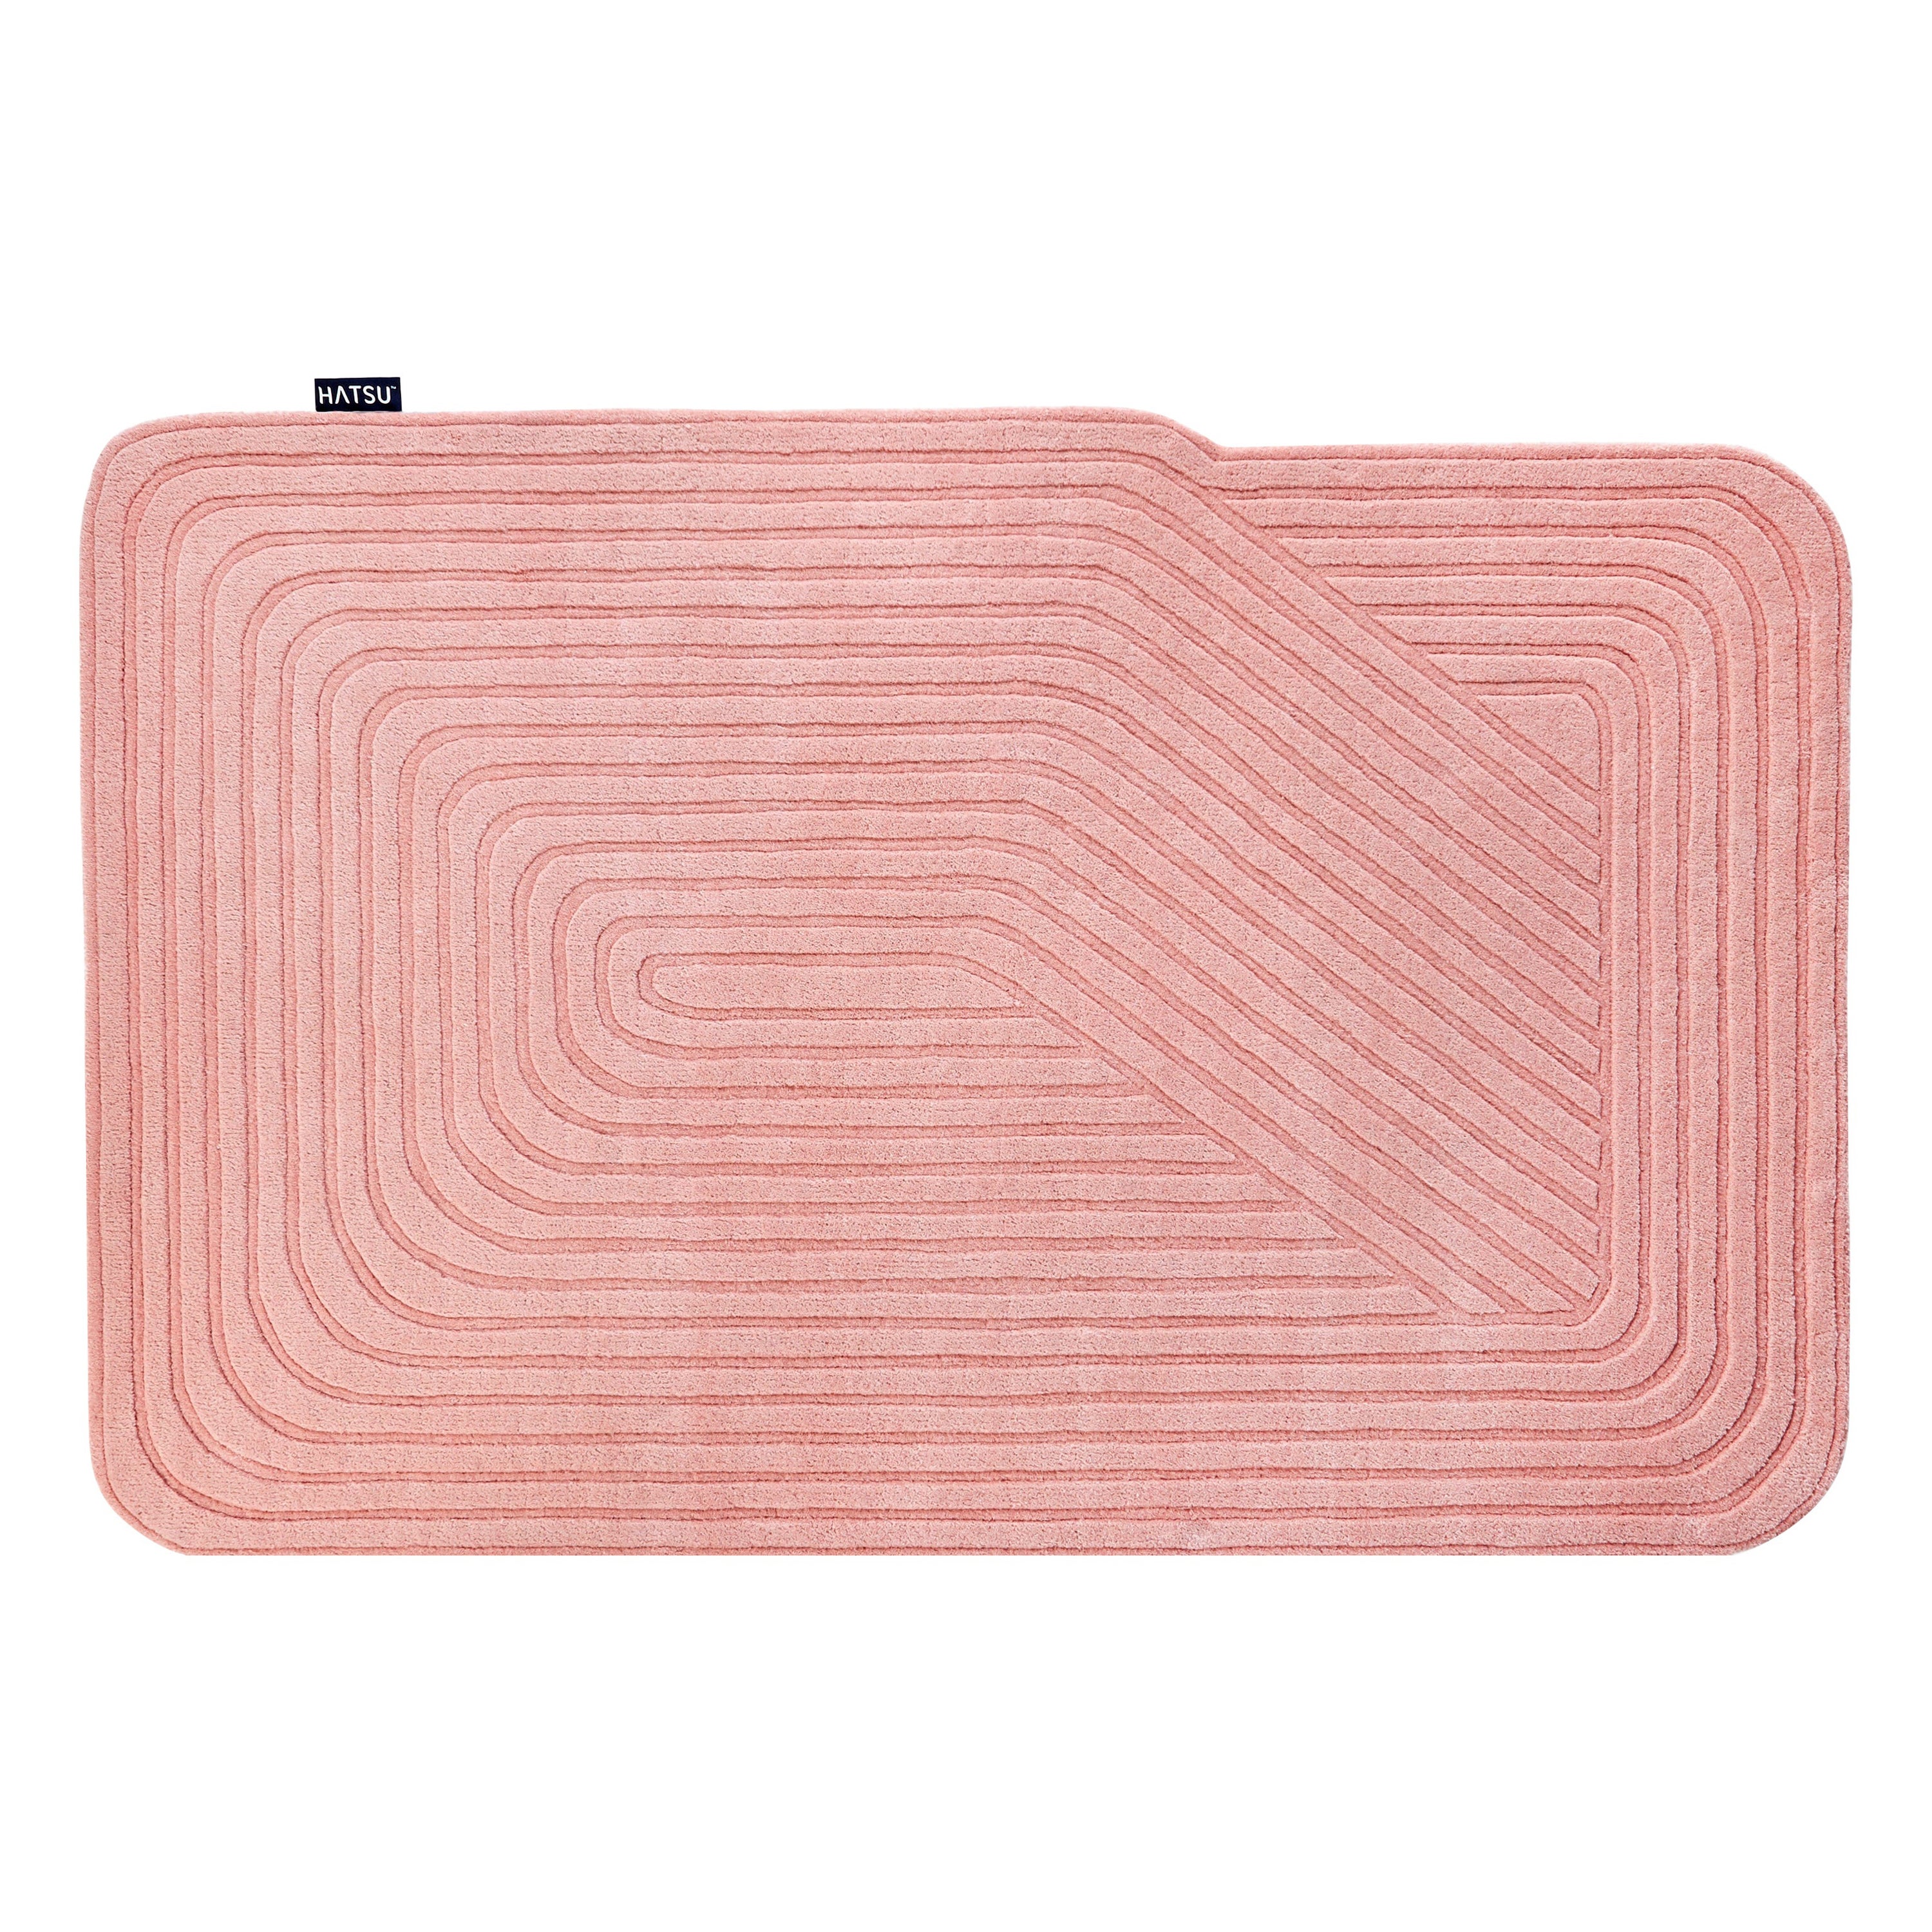 Hand Tufted Uneven Pink Rug by Hatsu For Sale